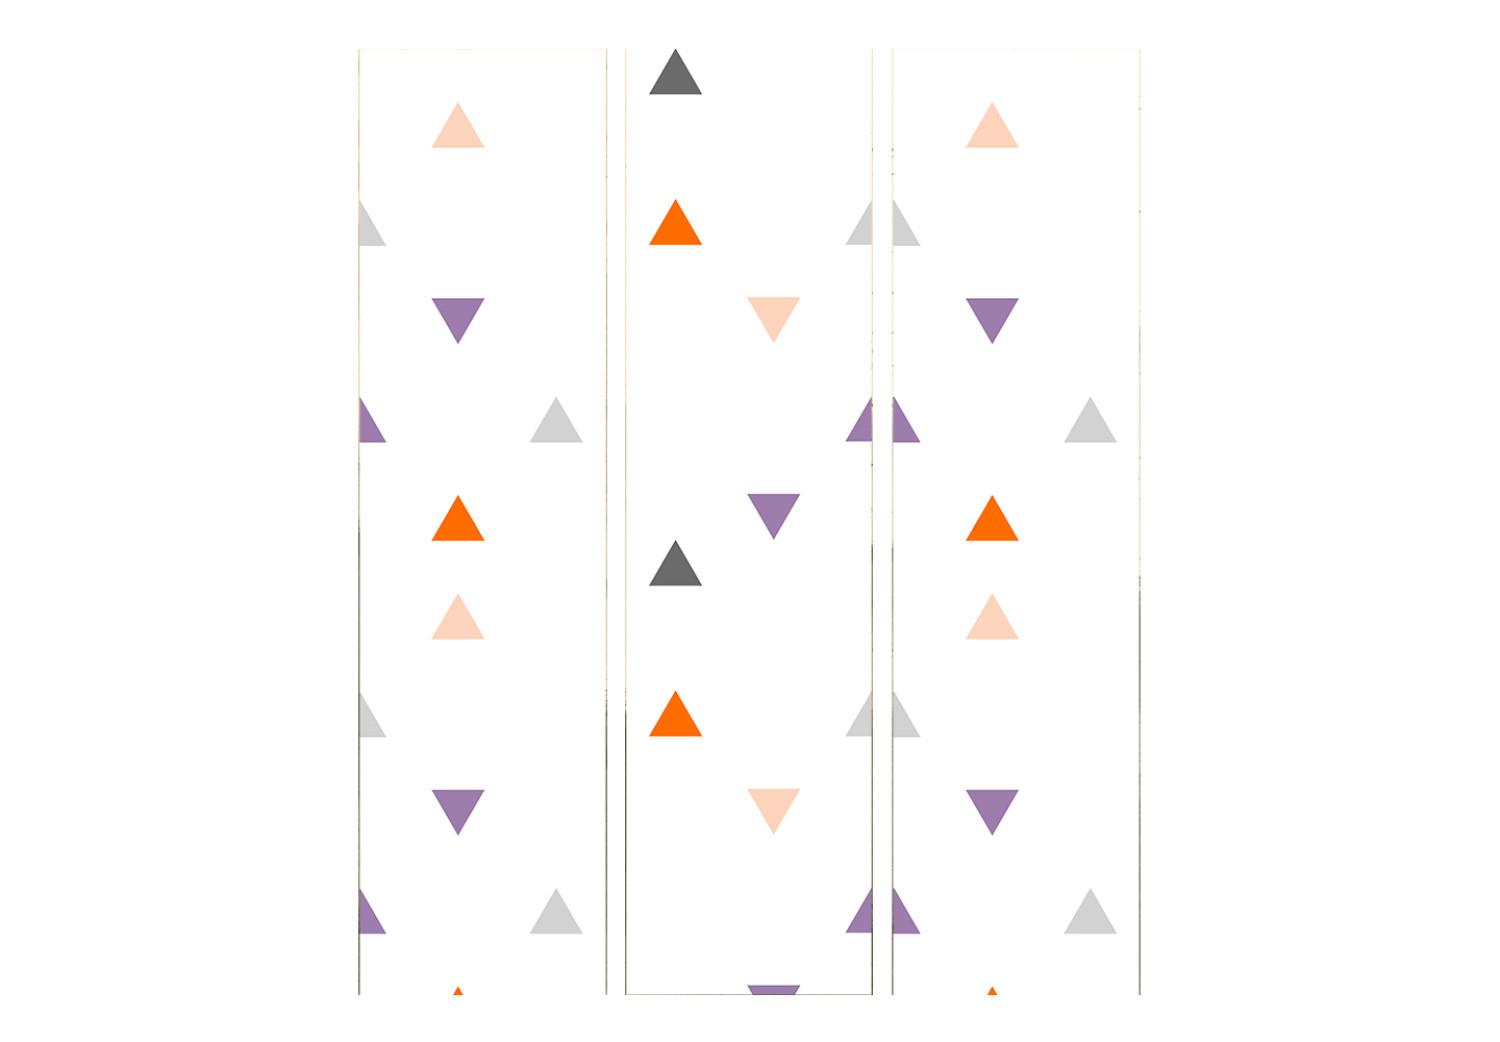 Room Divider Rain of Triangles (3-piece) - colorful figures on a white pattern